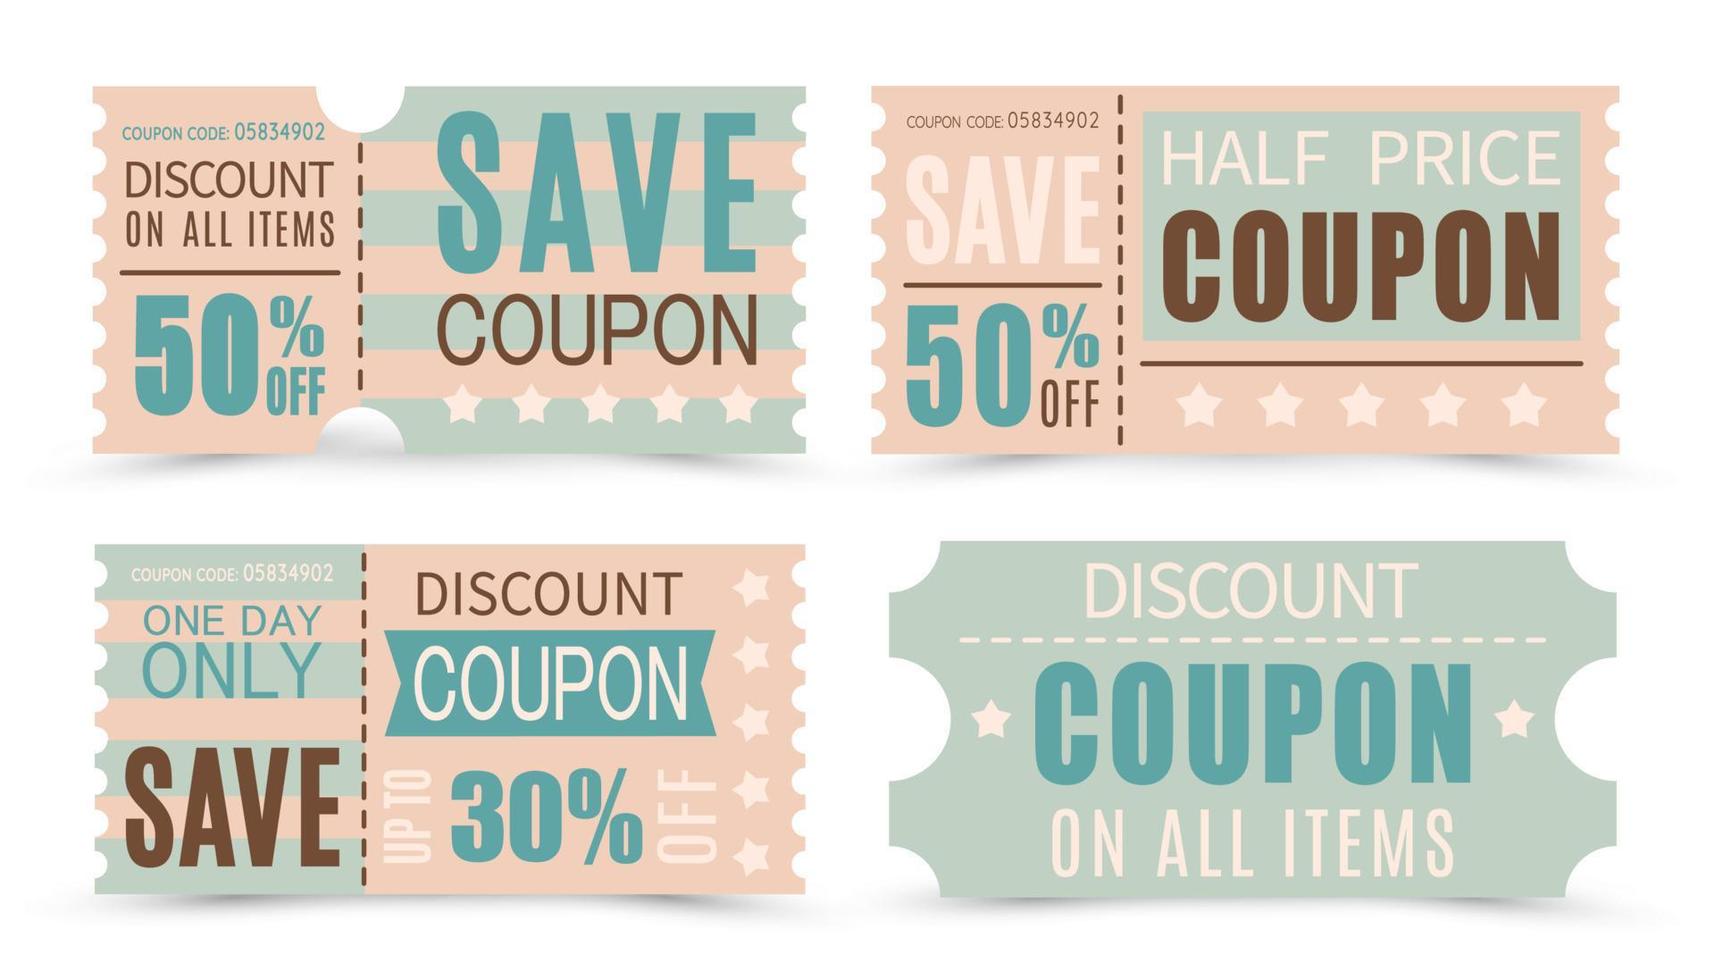 https://static.vecteezy.com/system/resources/previews/011/448/085/non_2x/set-of-discount-coupons-in-different-shapes-gift-voucher-with-coupon-code-sale-and-discount-or-gift-concept-illustration-vector.jpg